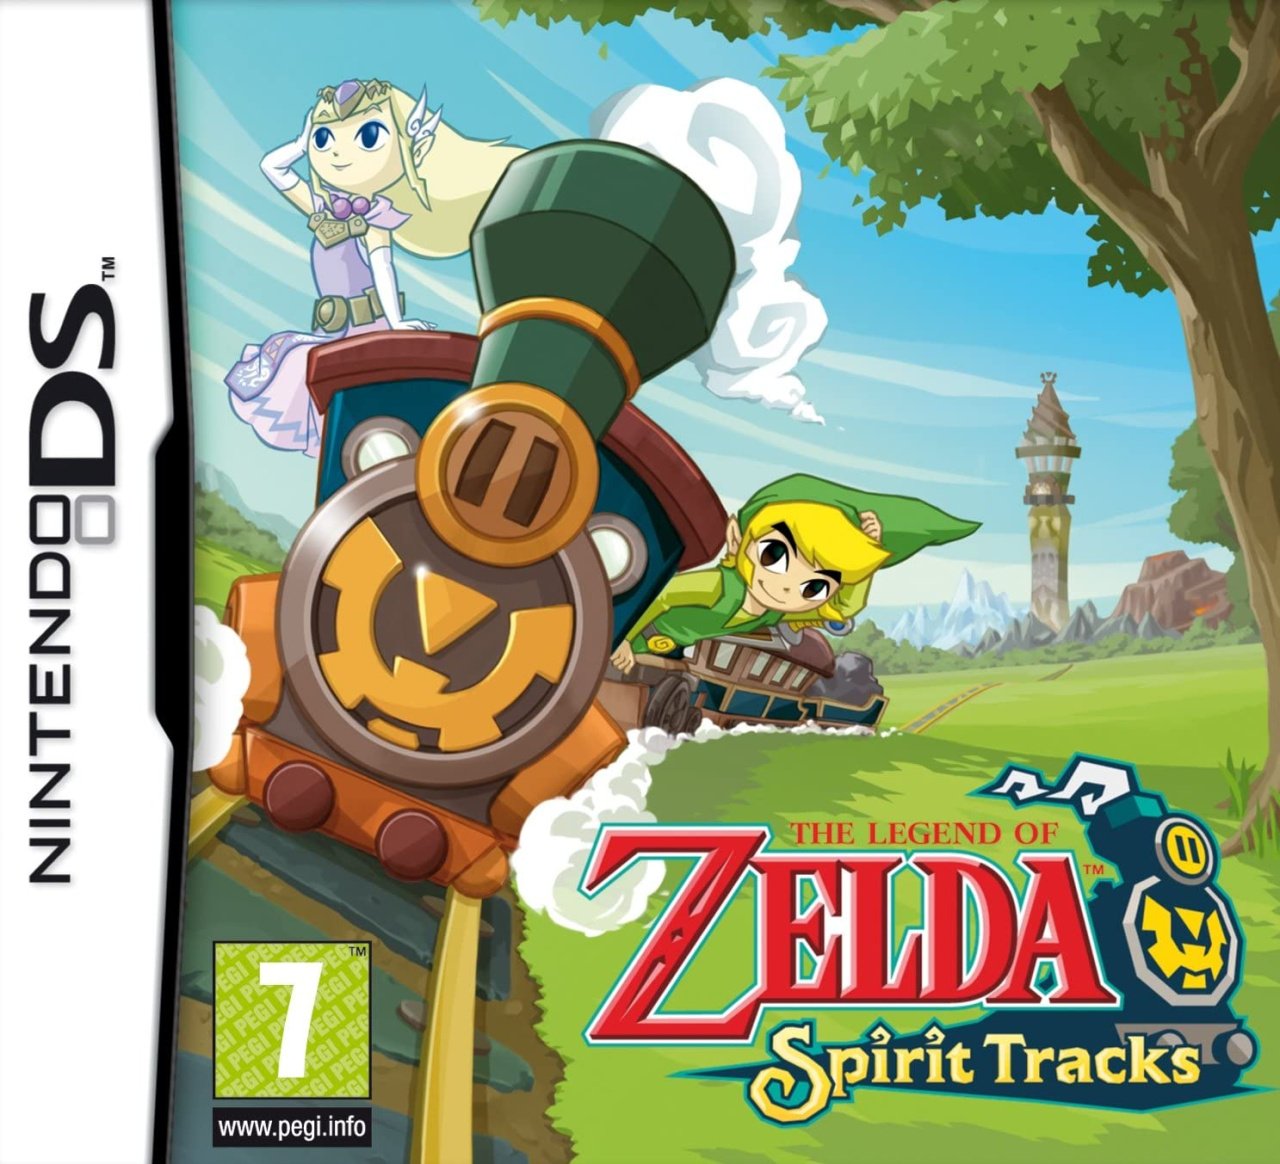 The Legend of Zelda: The Wind Waker Nintendo DS Box Art Cover by